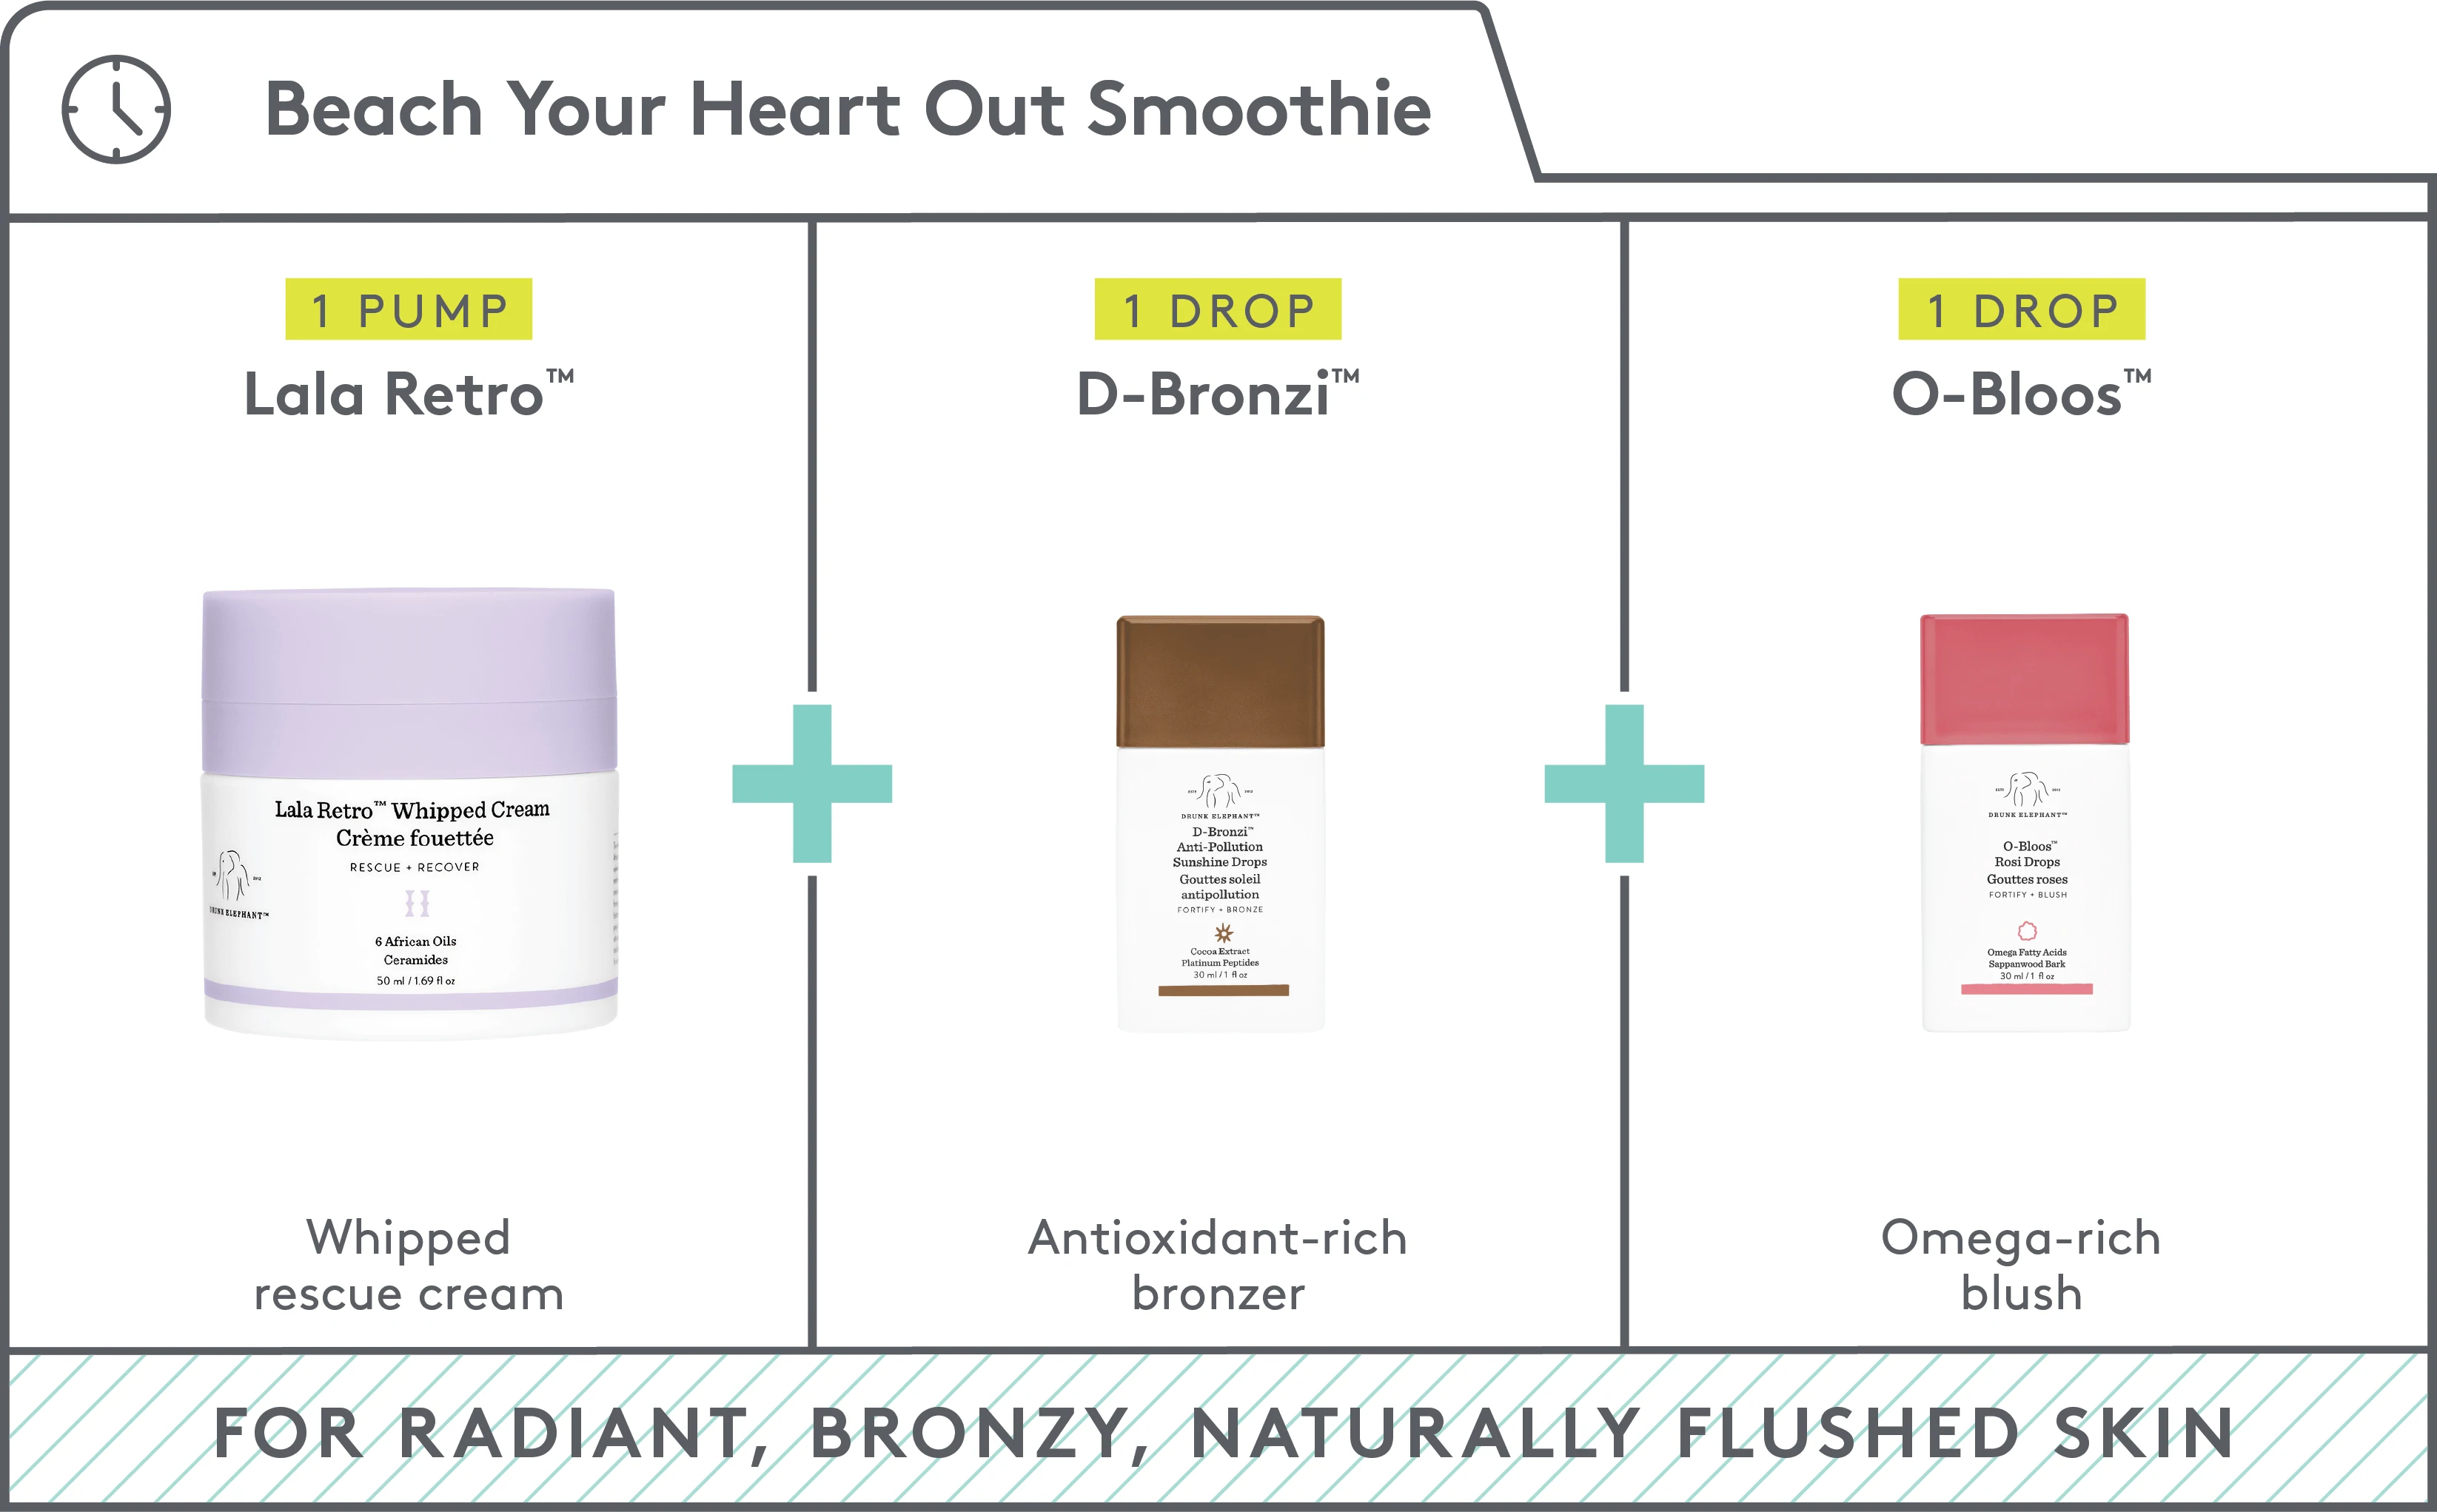 Beach Your Heart Out Smoothie